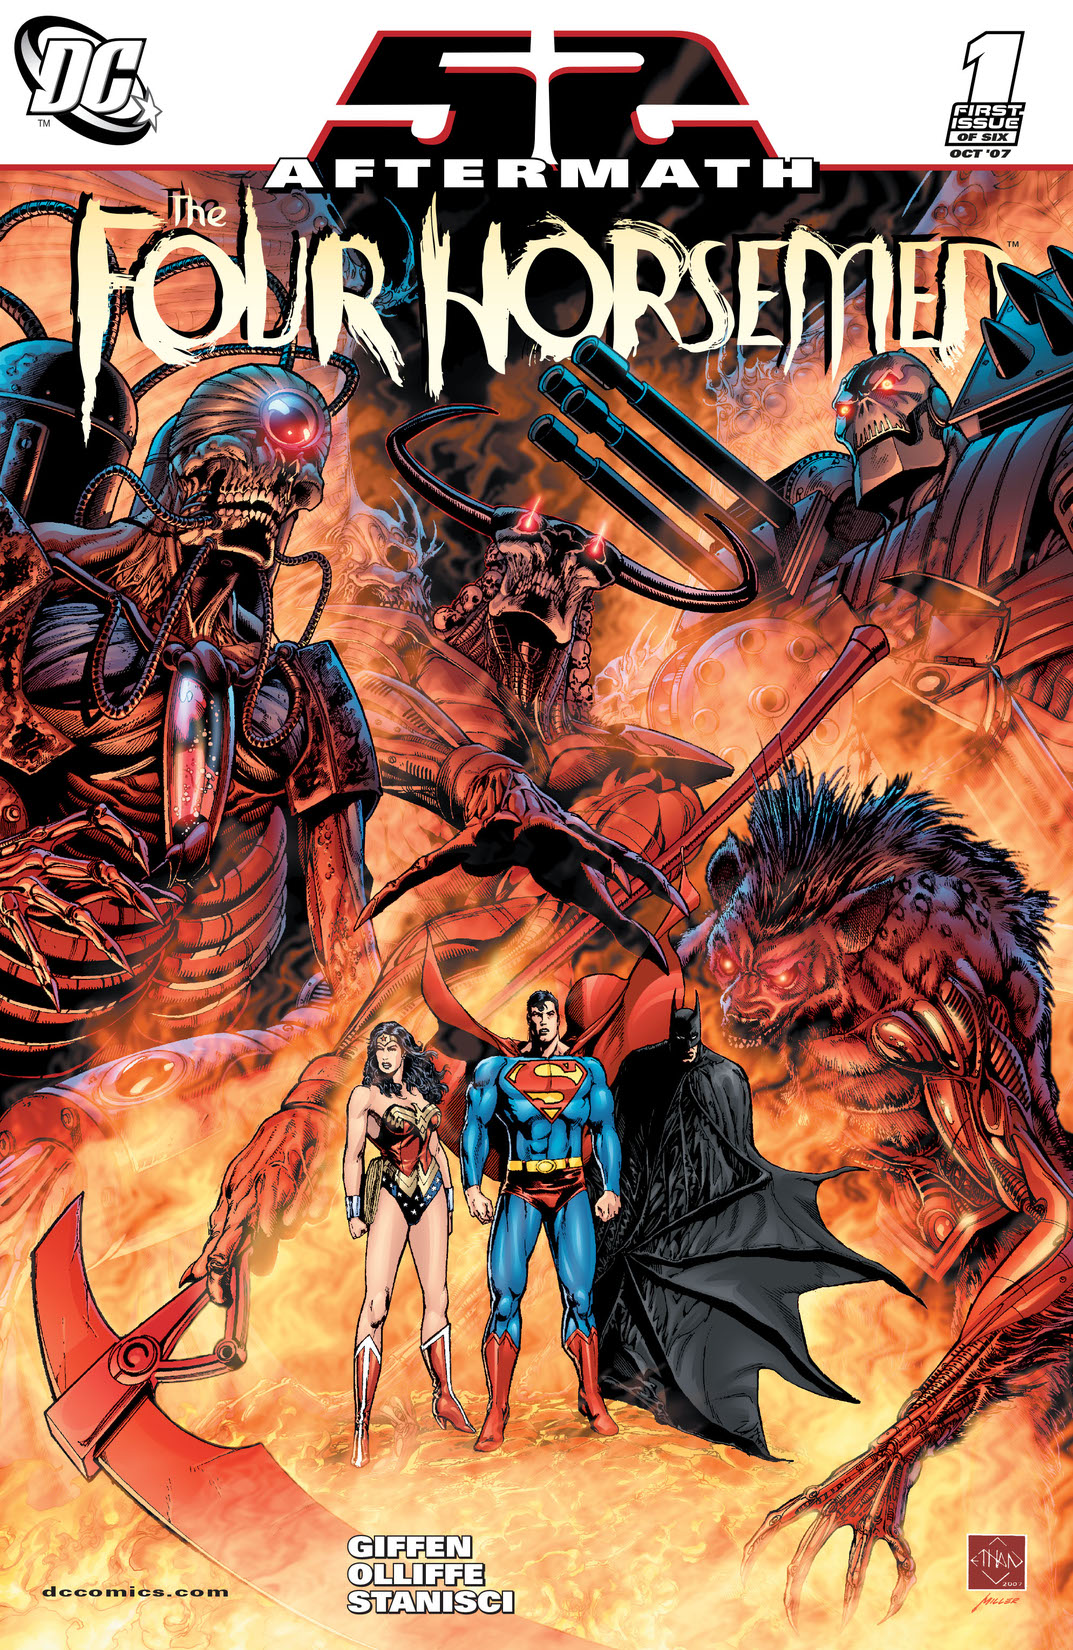 52 Aftermath: The Four Horsemen #1 preview images